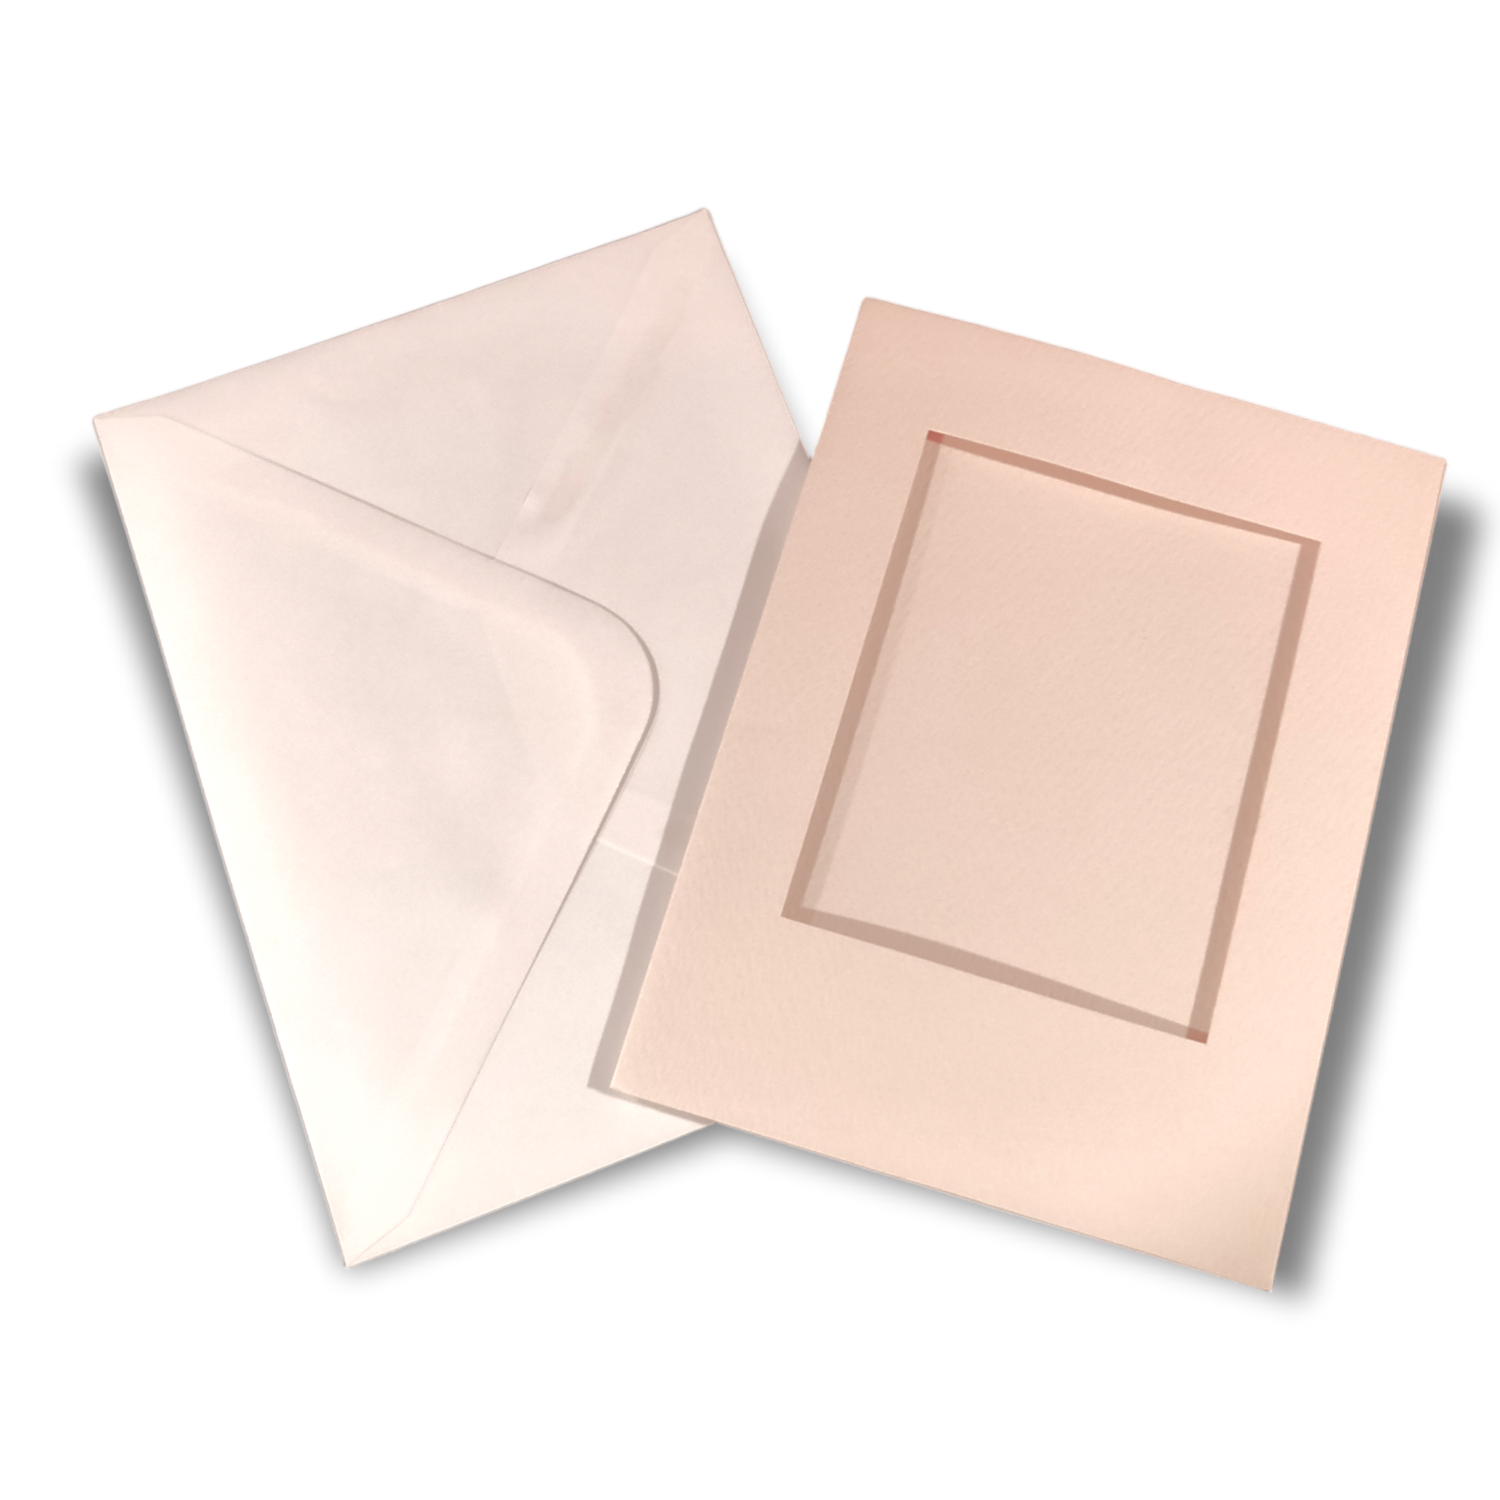 2x Pink Double Fold Textured Aperture Cards & Envelopes 145x198mm